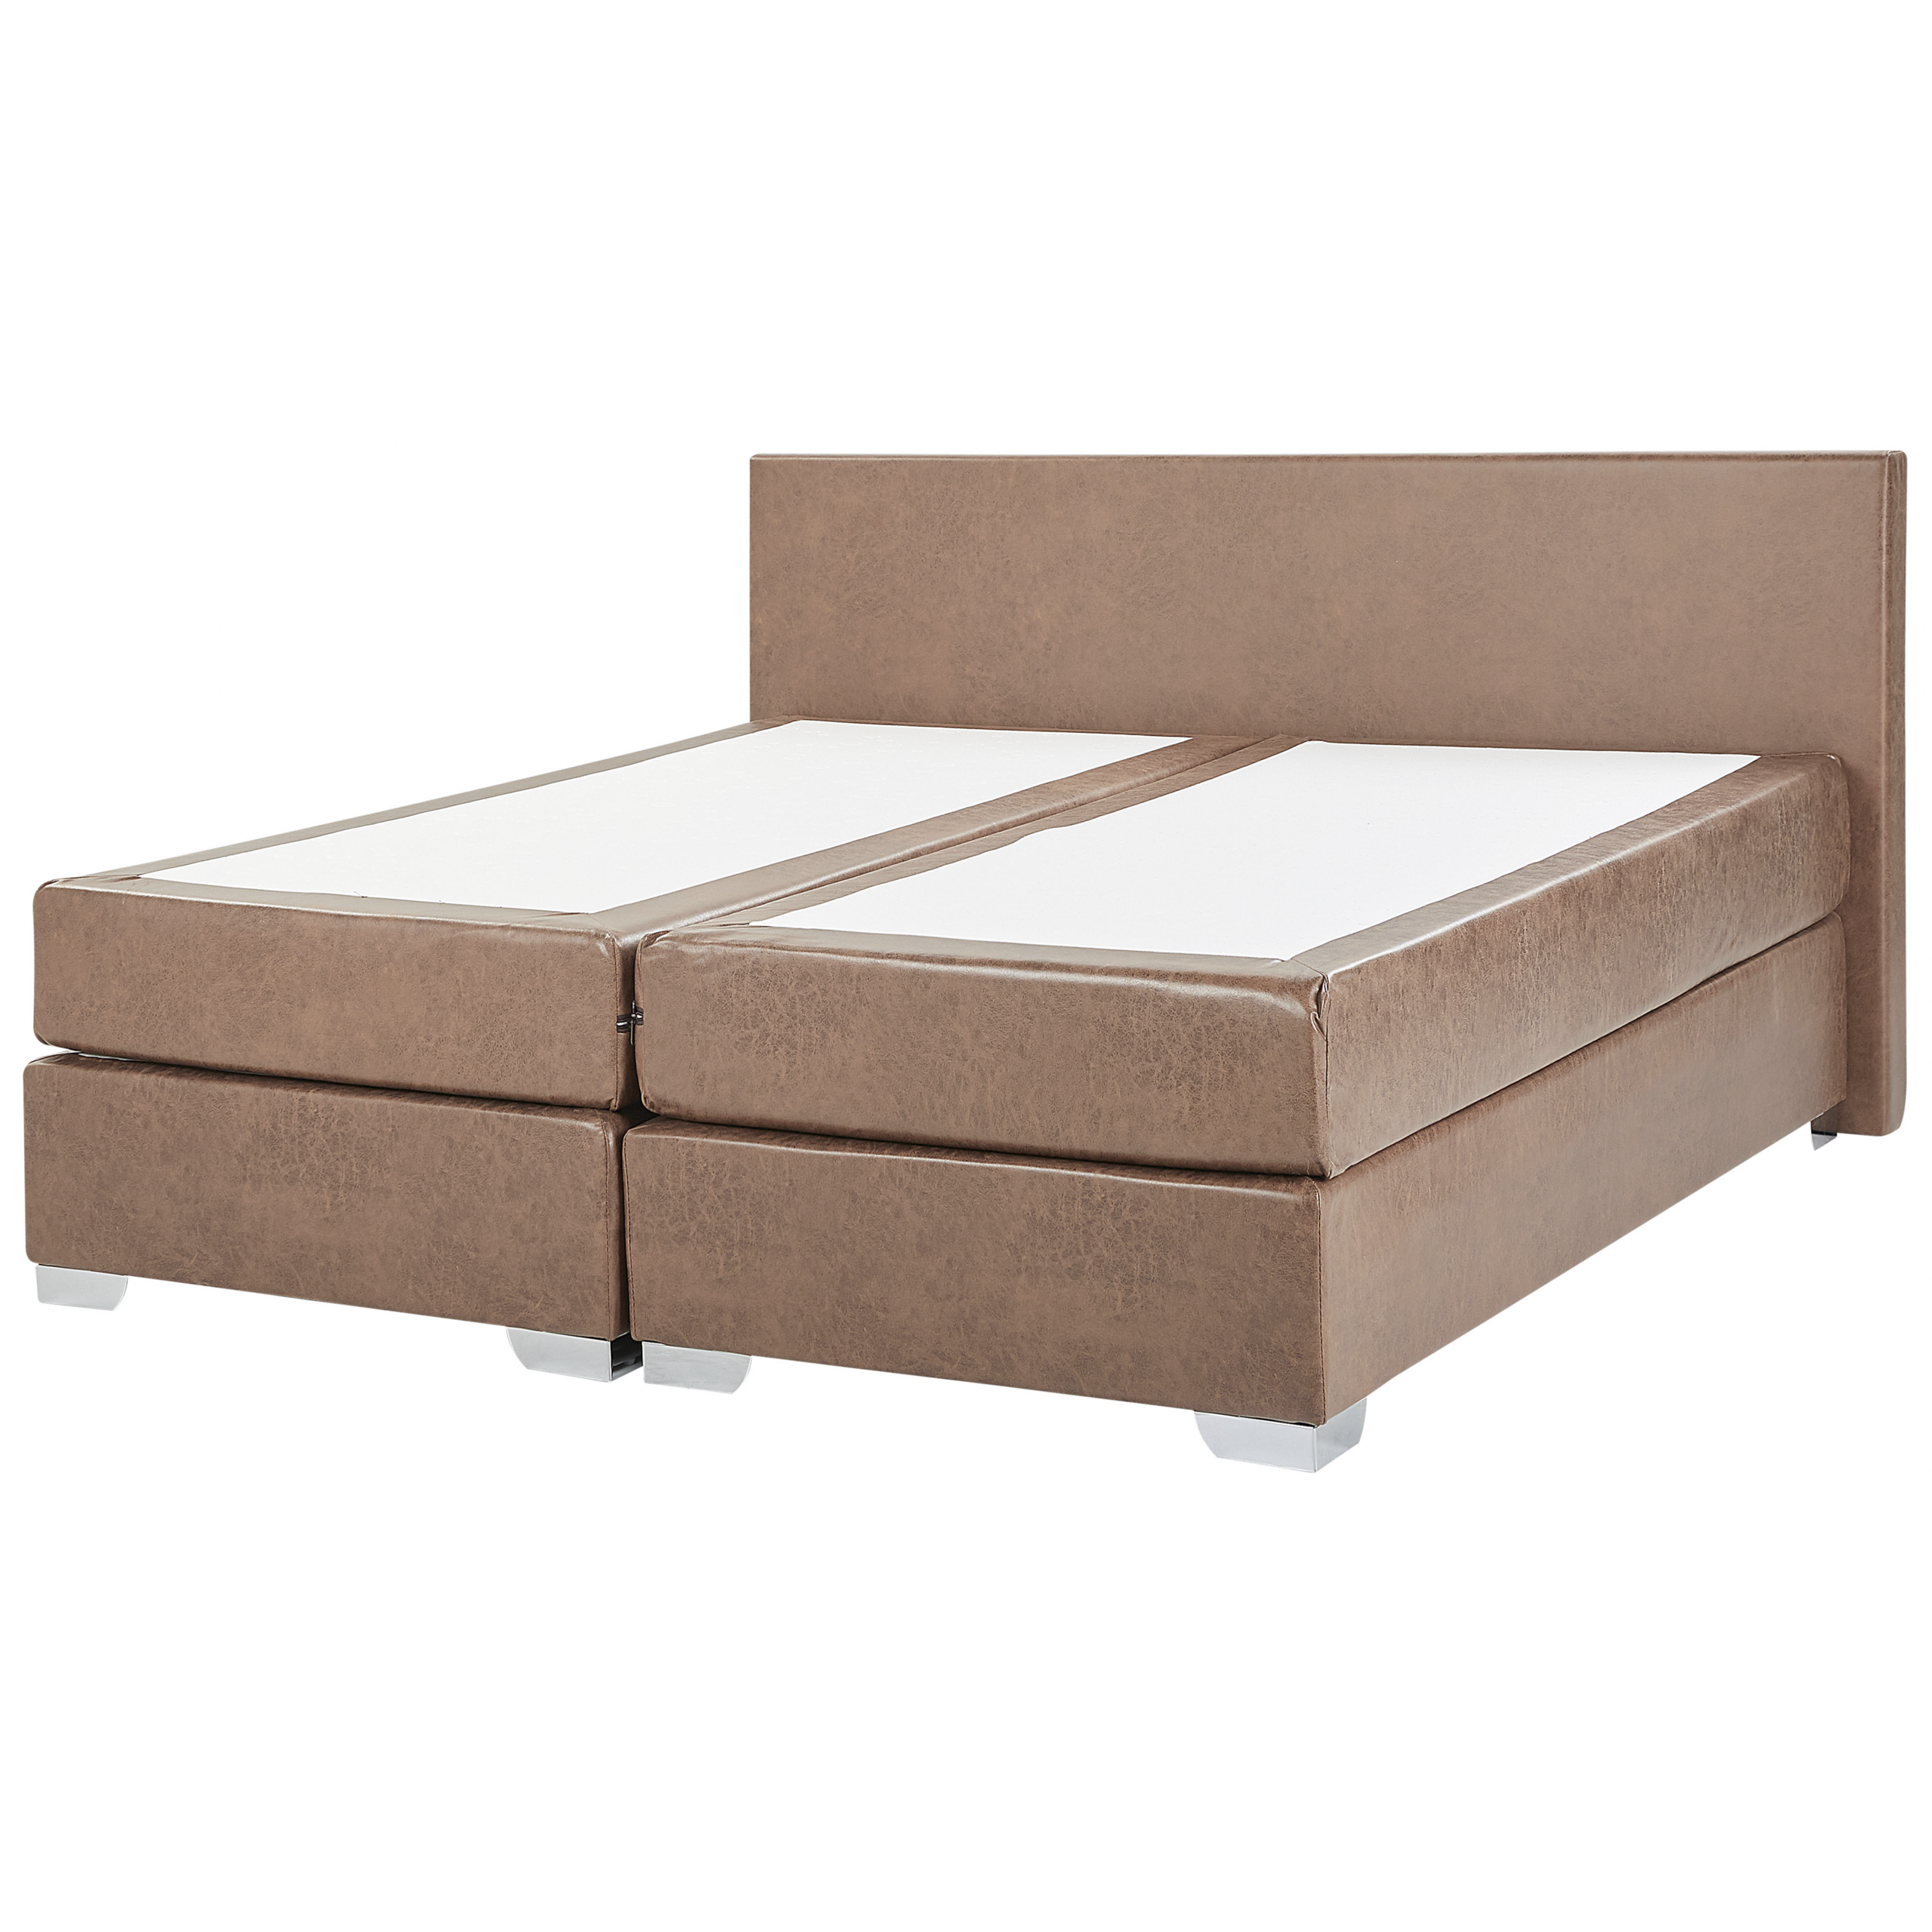 Beliani EU Super King Size Continental Bed 6ft Brown Faux Leather with Pocket Spring Mattress